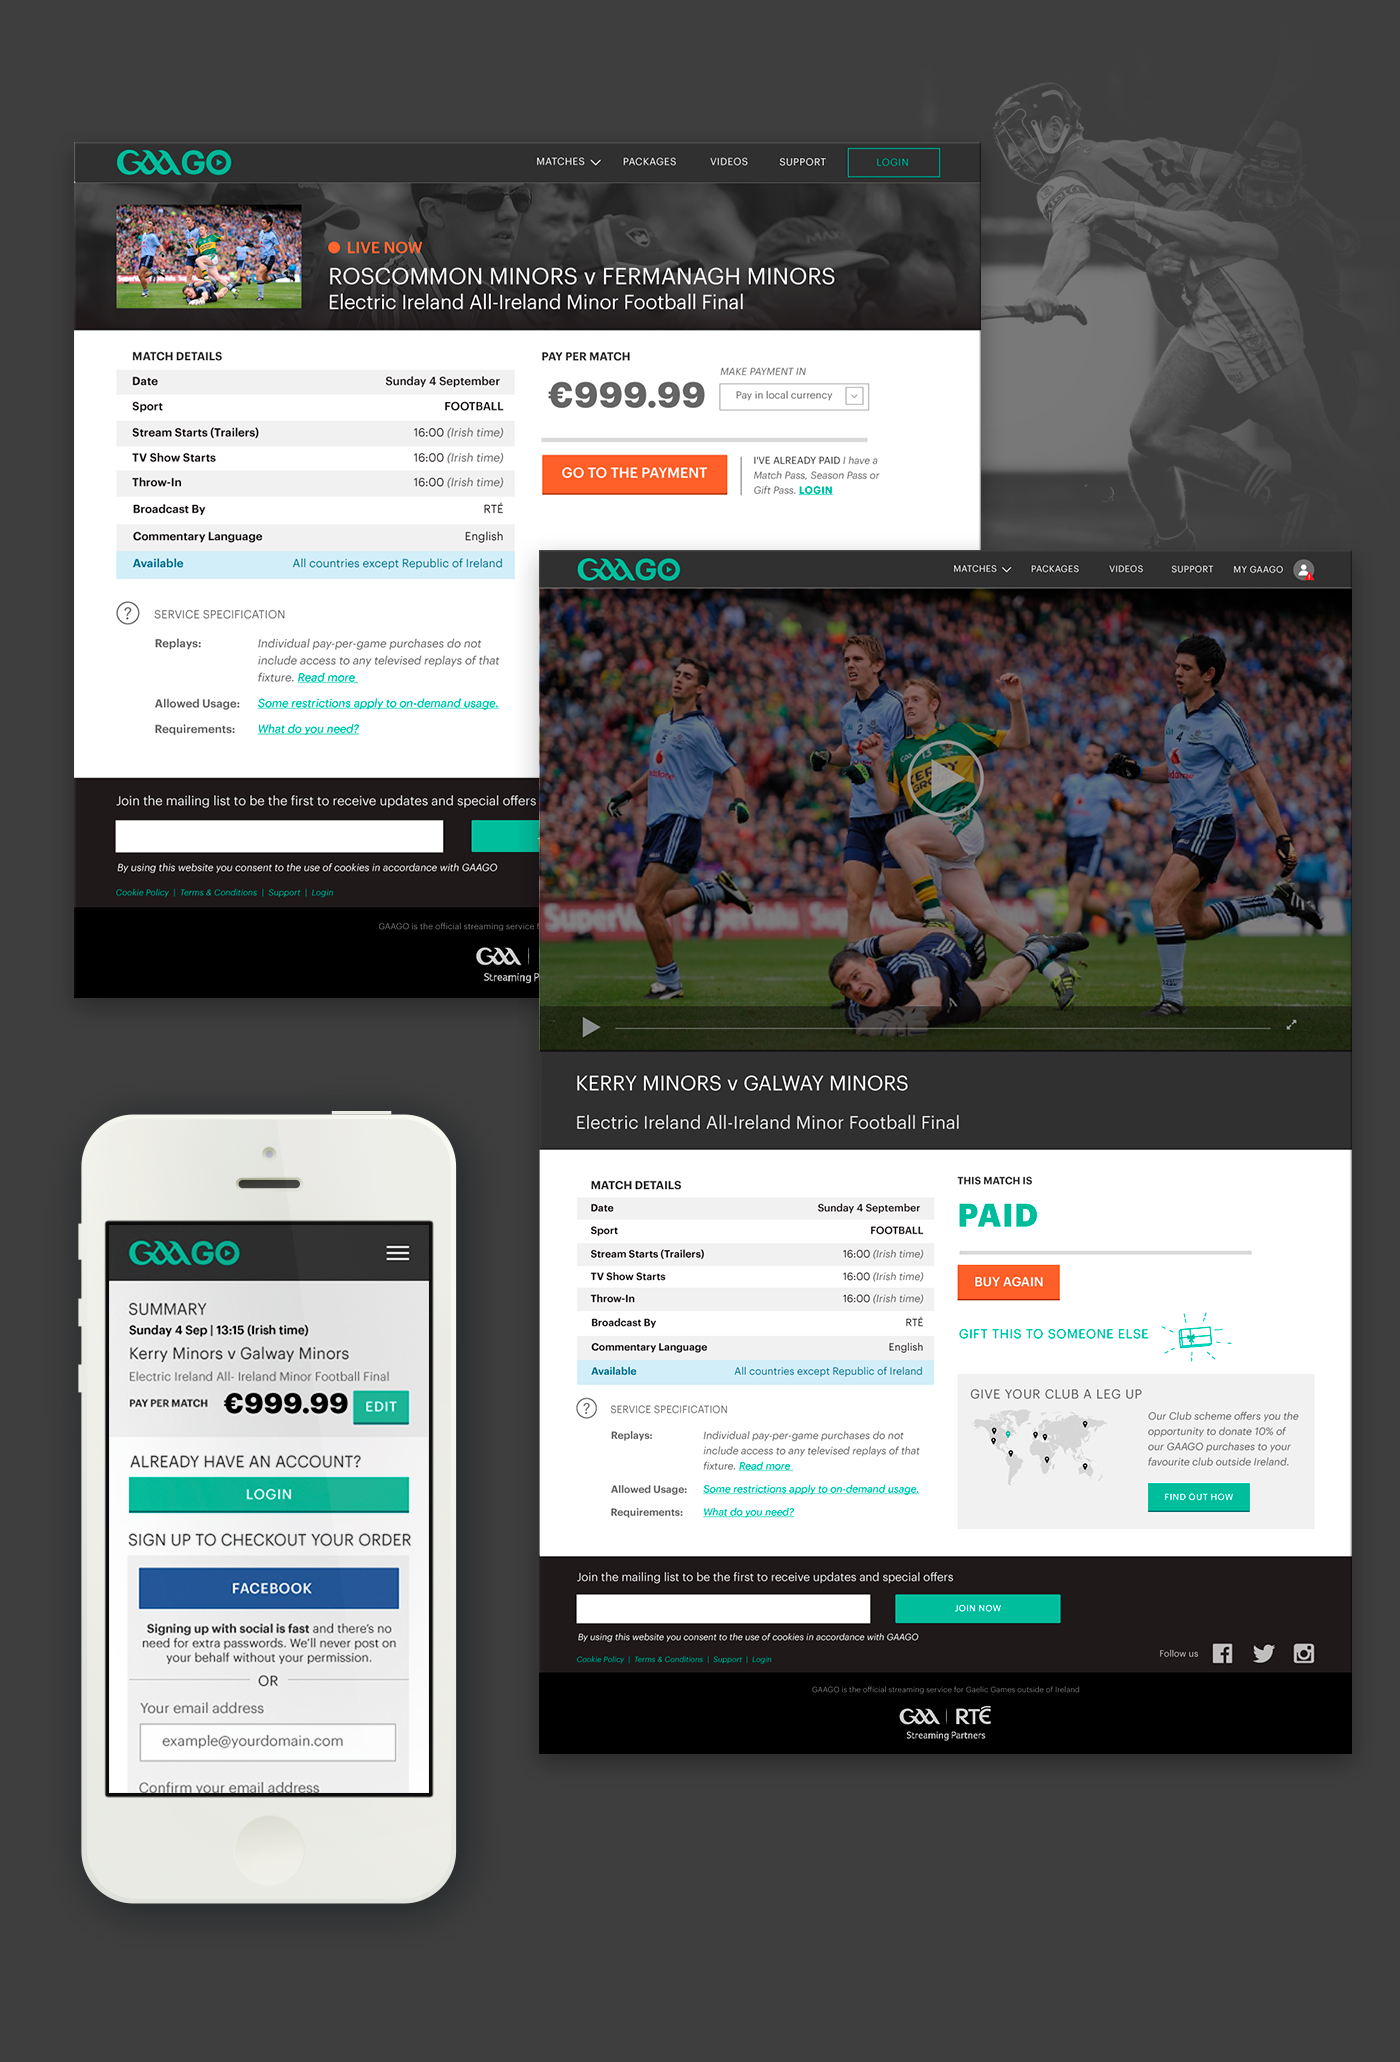 GAAGO match detail page in mobile and desktop view